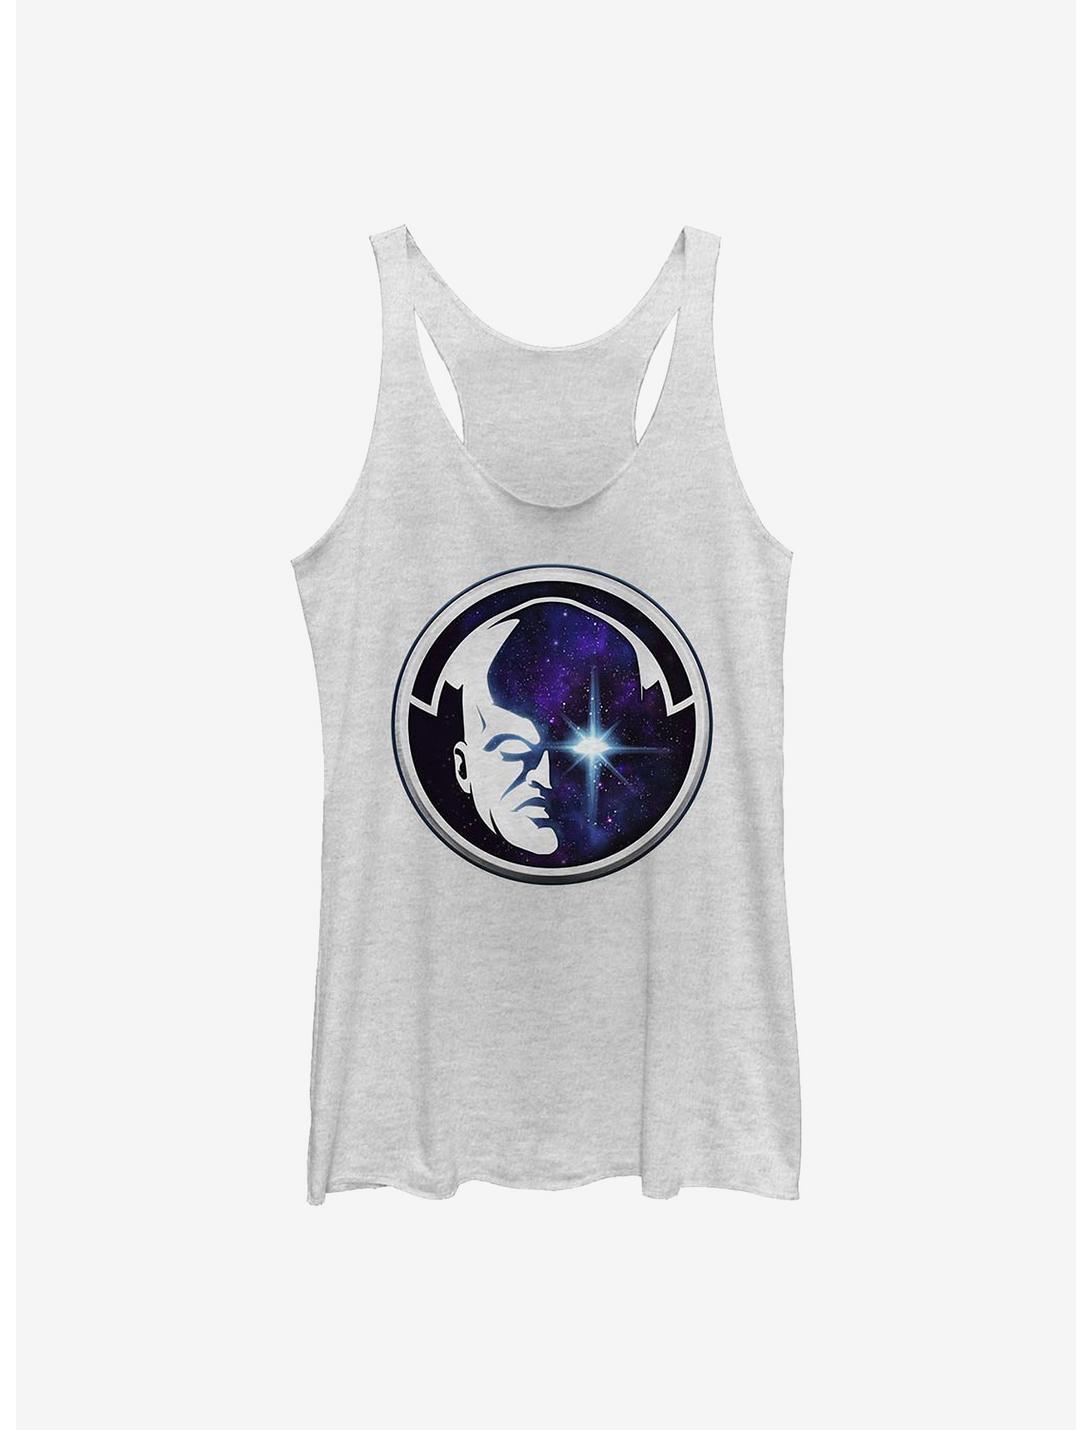 Marvel What If...? The Watcher Circle Frame Girls Tank, WHITE HTR, hi-res